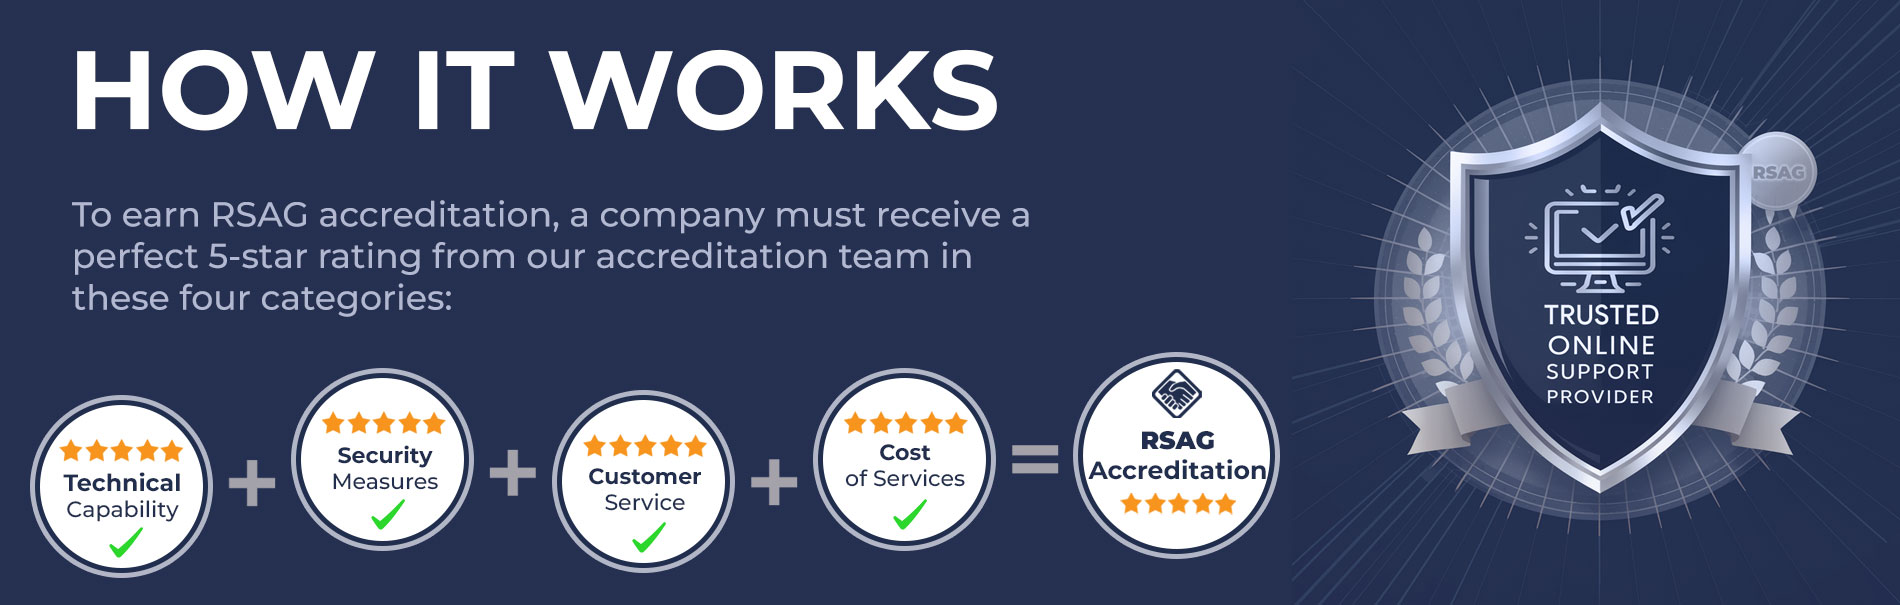 RSAG Accreditation Process Infographic